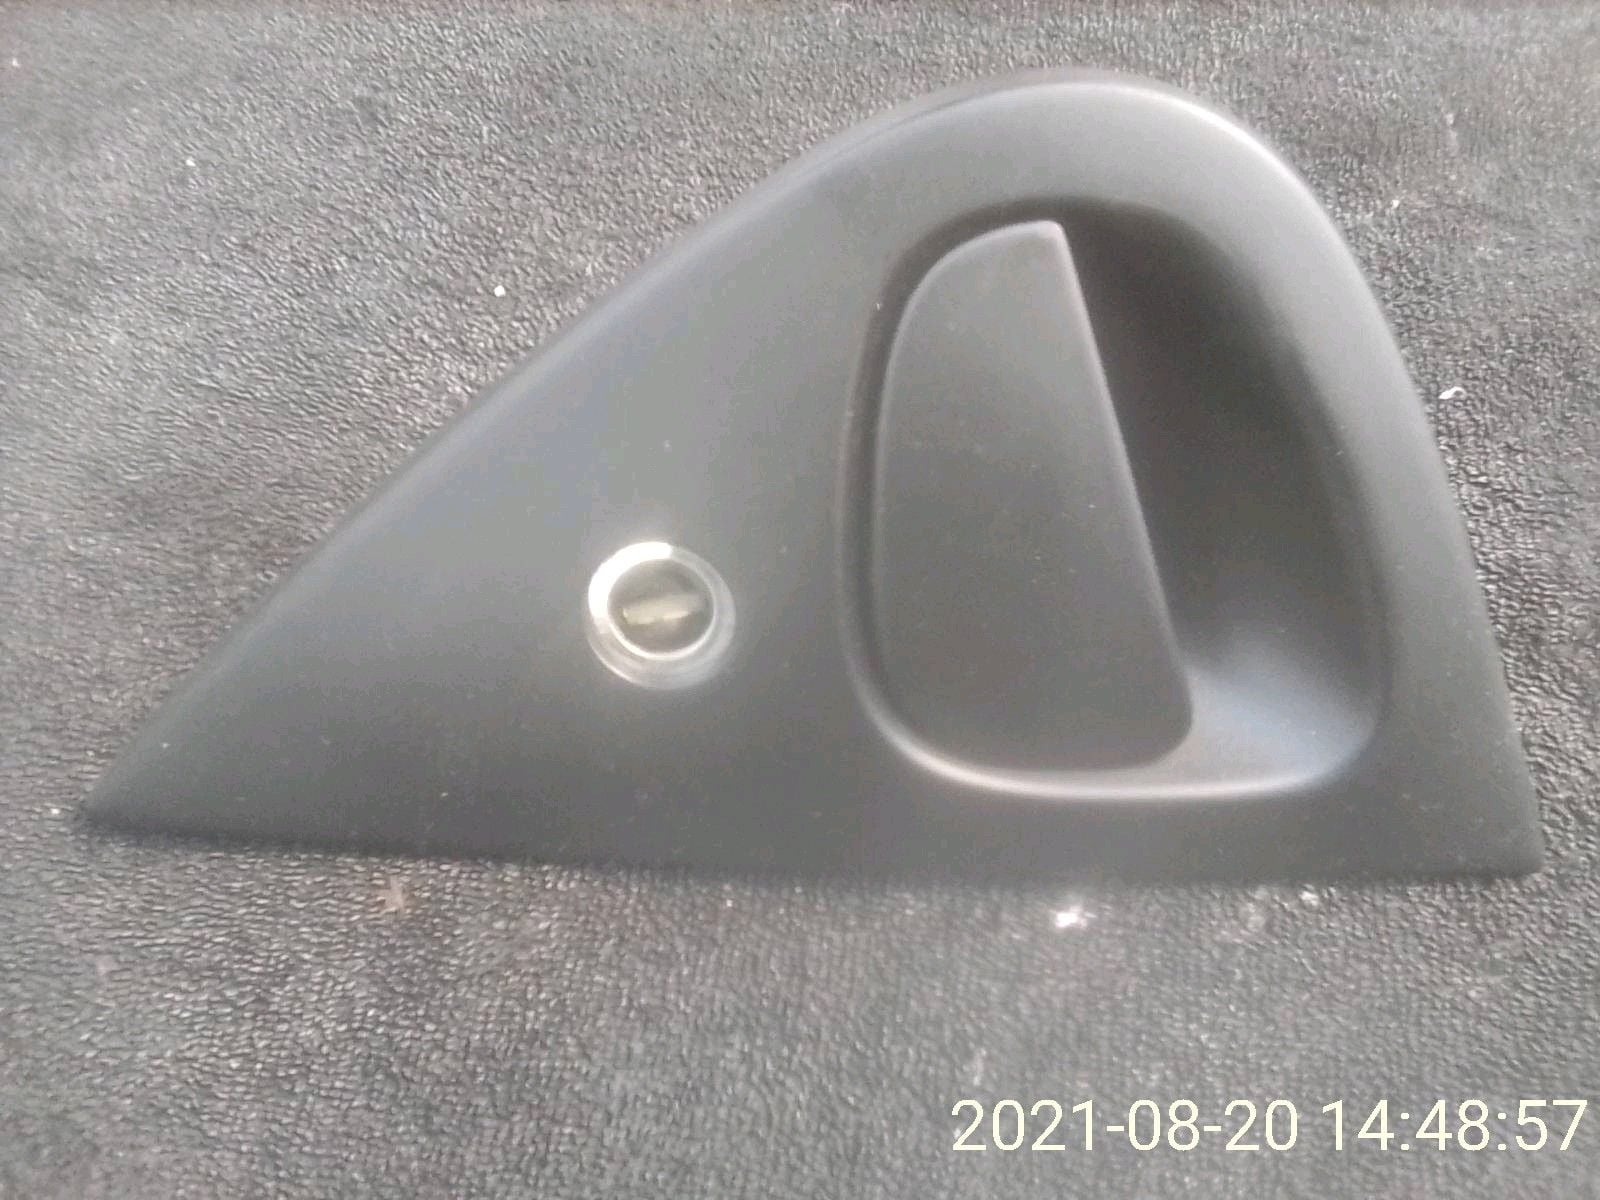 Exterior Body Parts - FD - OEM Left Side Outer Door Handle - Used - 1993 to 2002 Mazda RX-7 - San Jose, CA 95121, United States